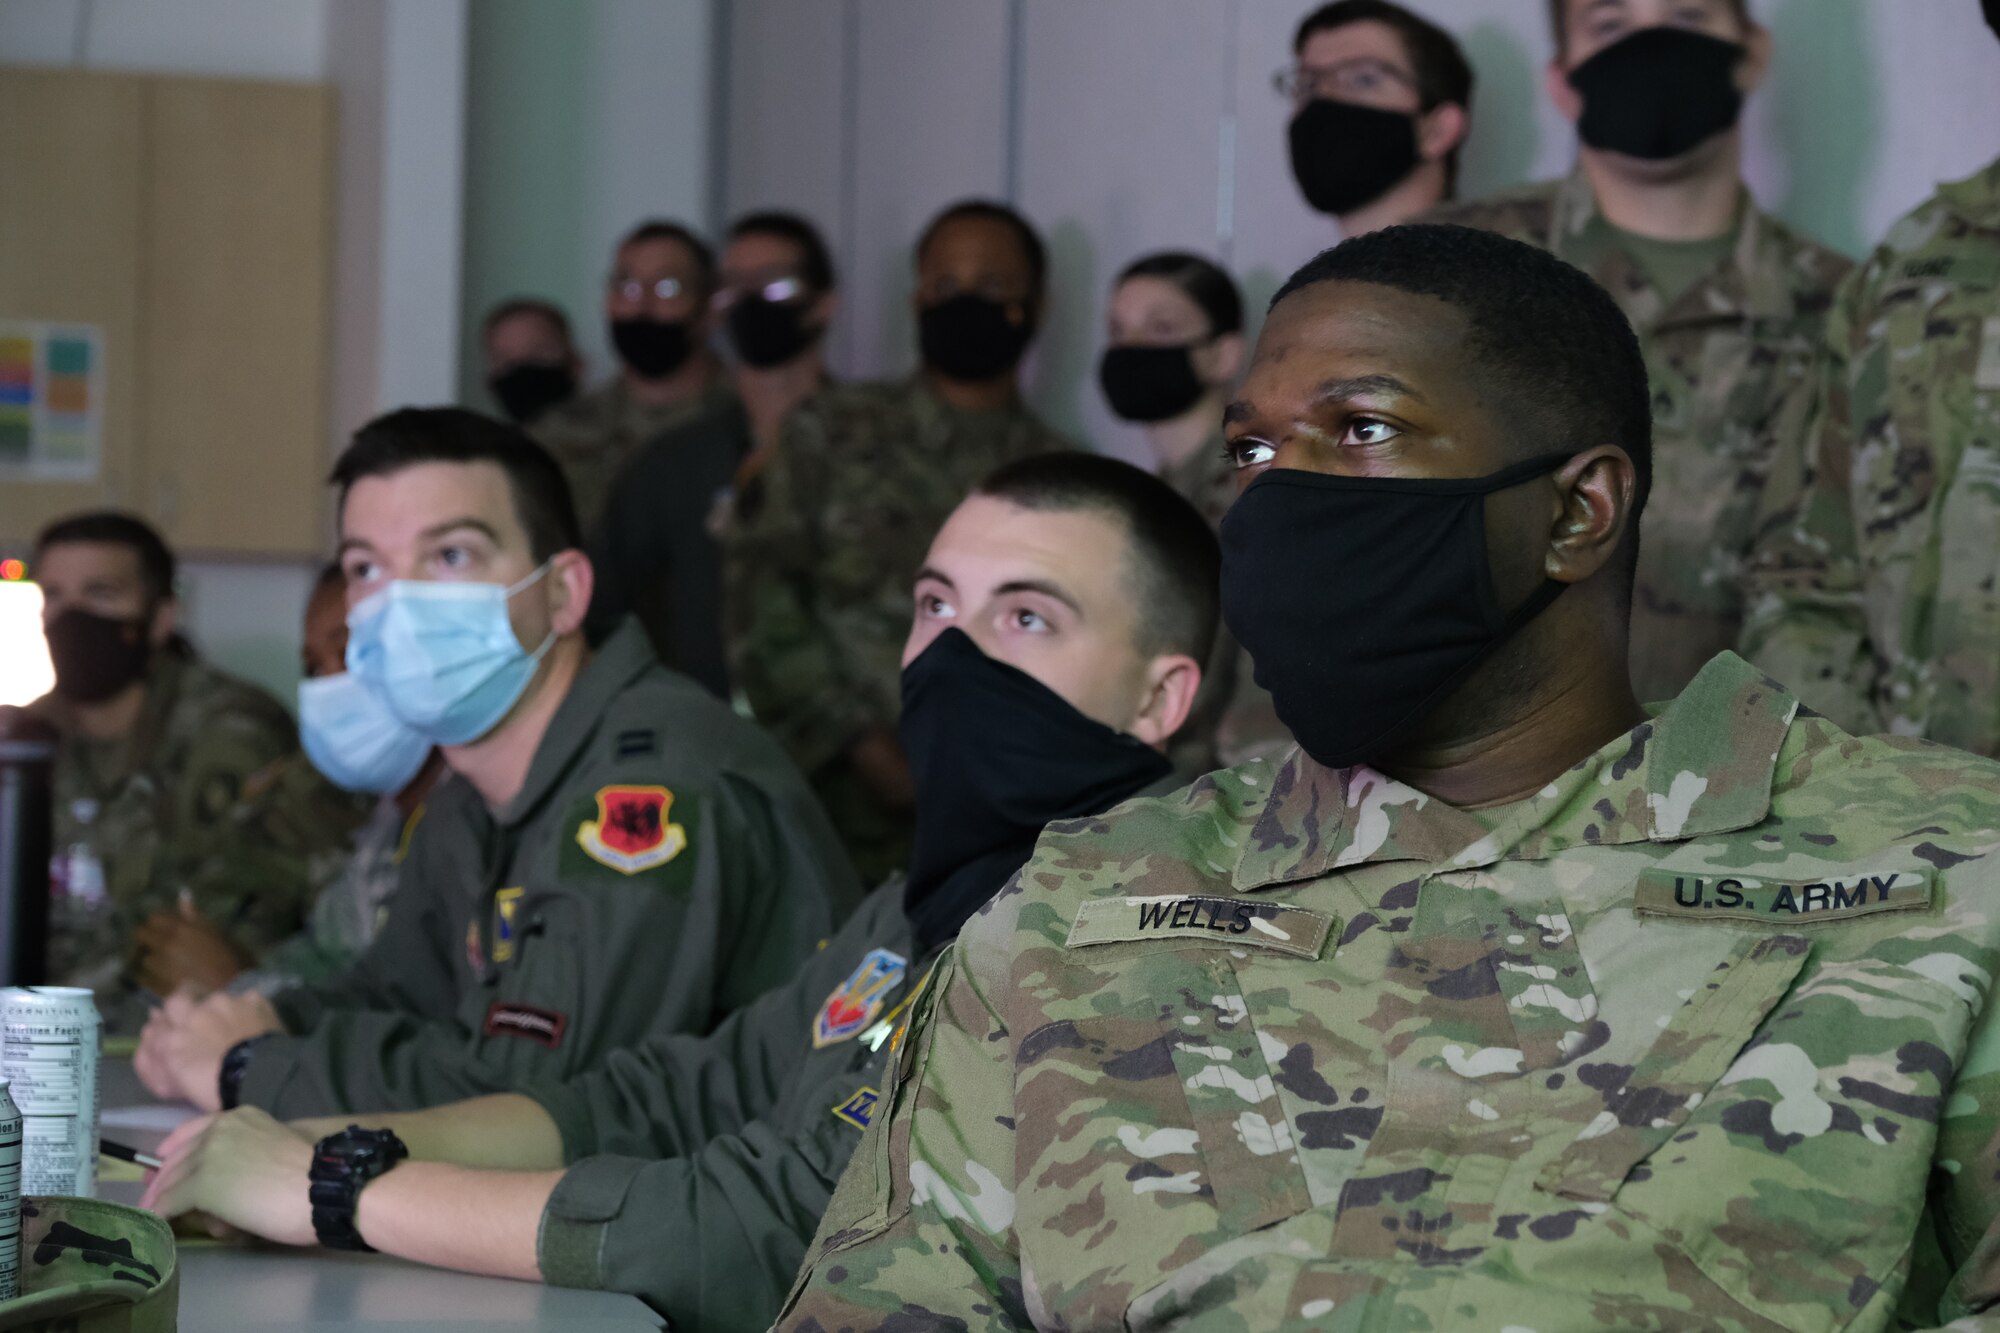 Military personnel in uniform seated at a table and military standing behind the table all wearing face masks.